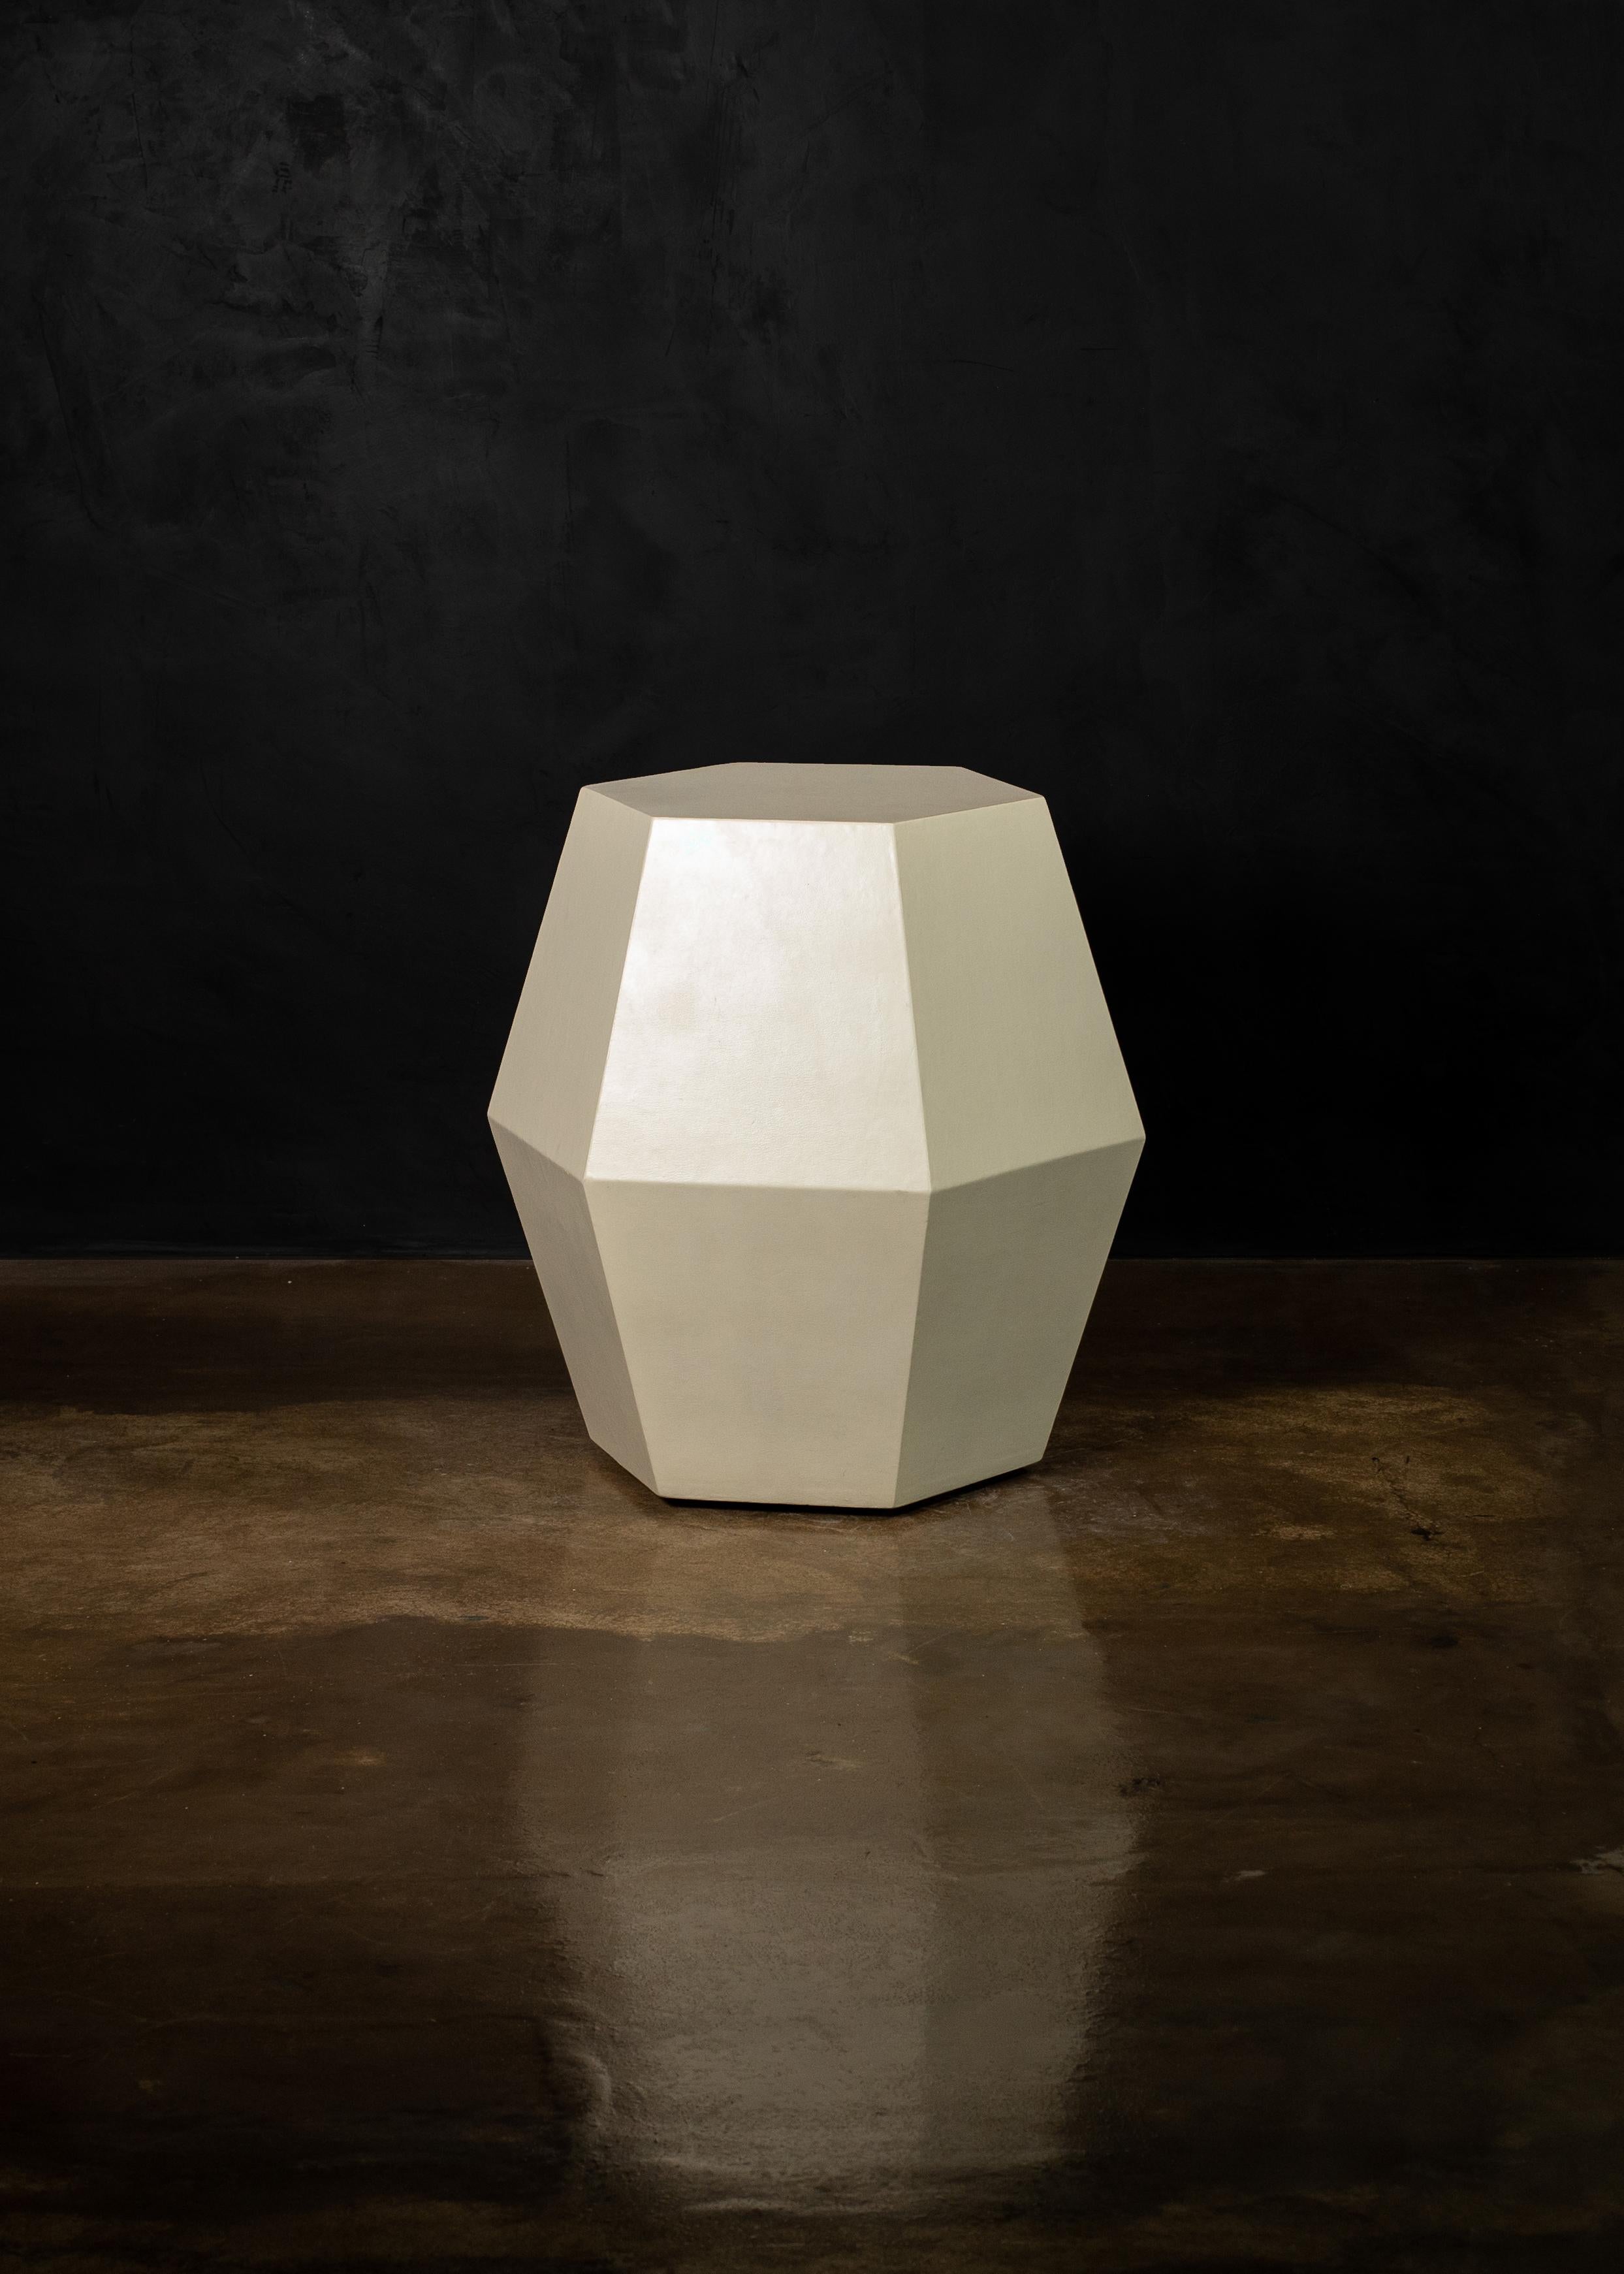 The name of the Tamino Hex comes from its hexagonal shape and can be specified in any of Costantini’s available materials and finishes. Shown here in crema laquer, these side tables feature a modern, geometric shape that allows the subtle variations